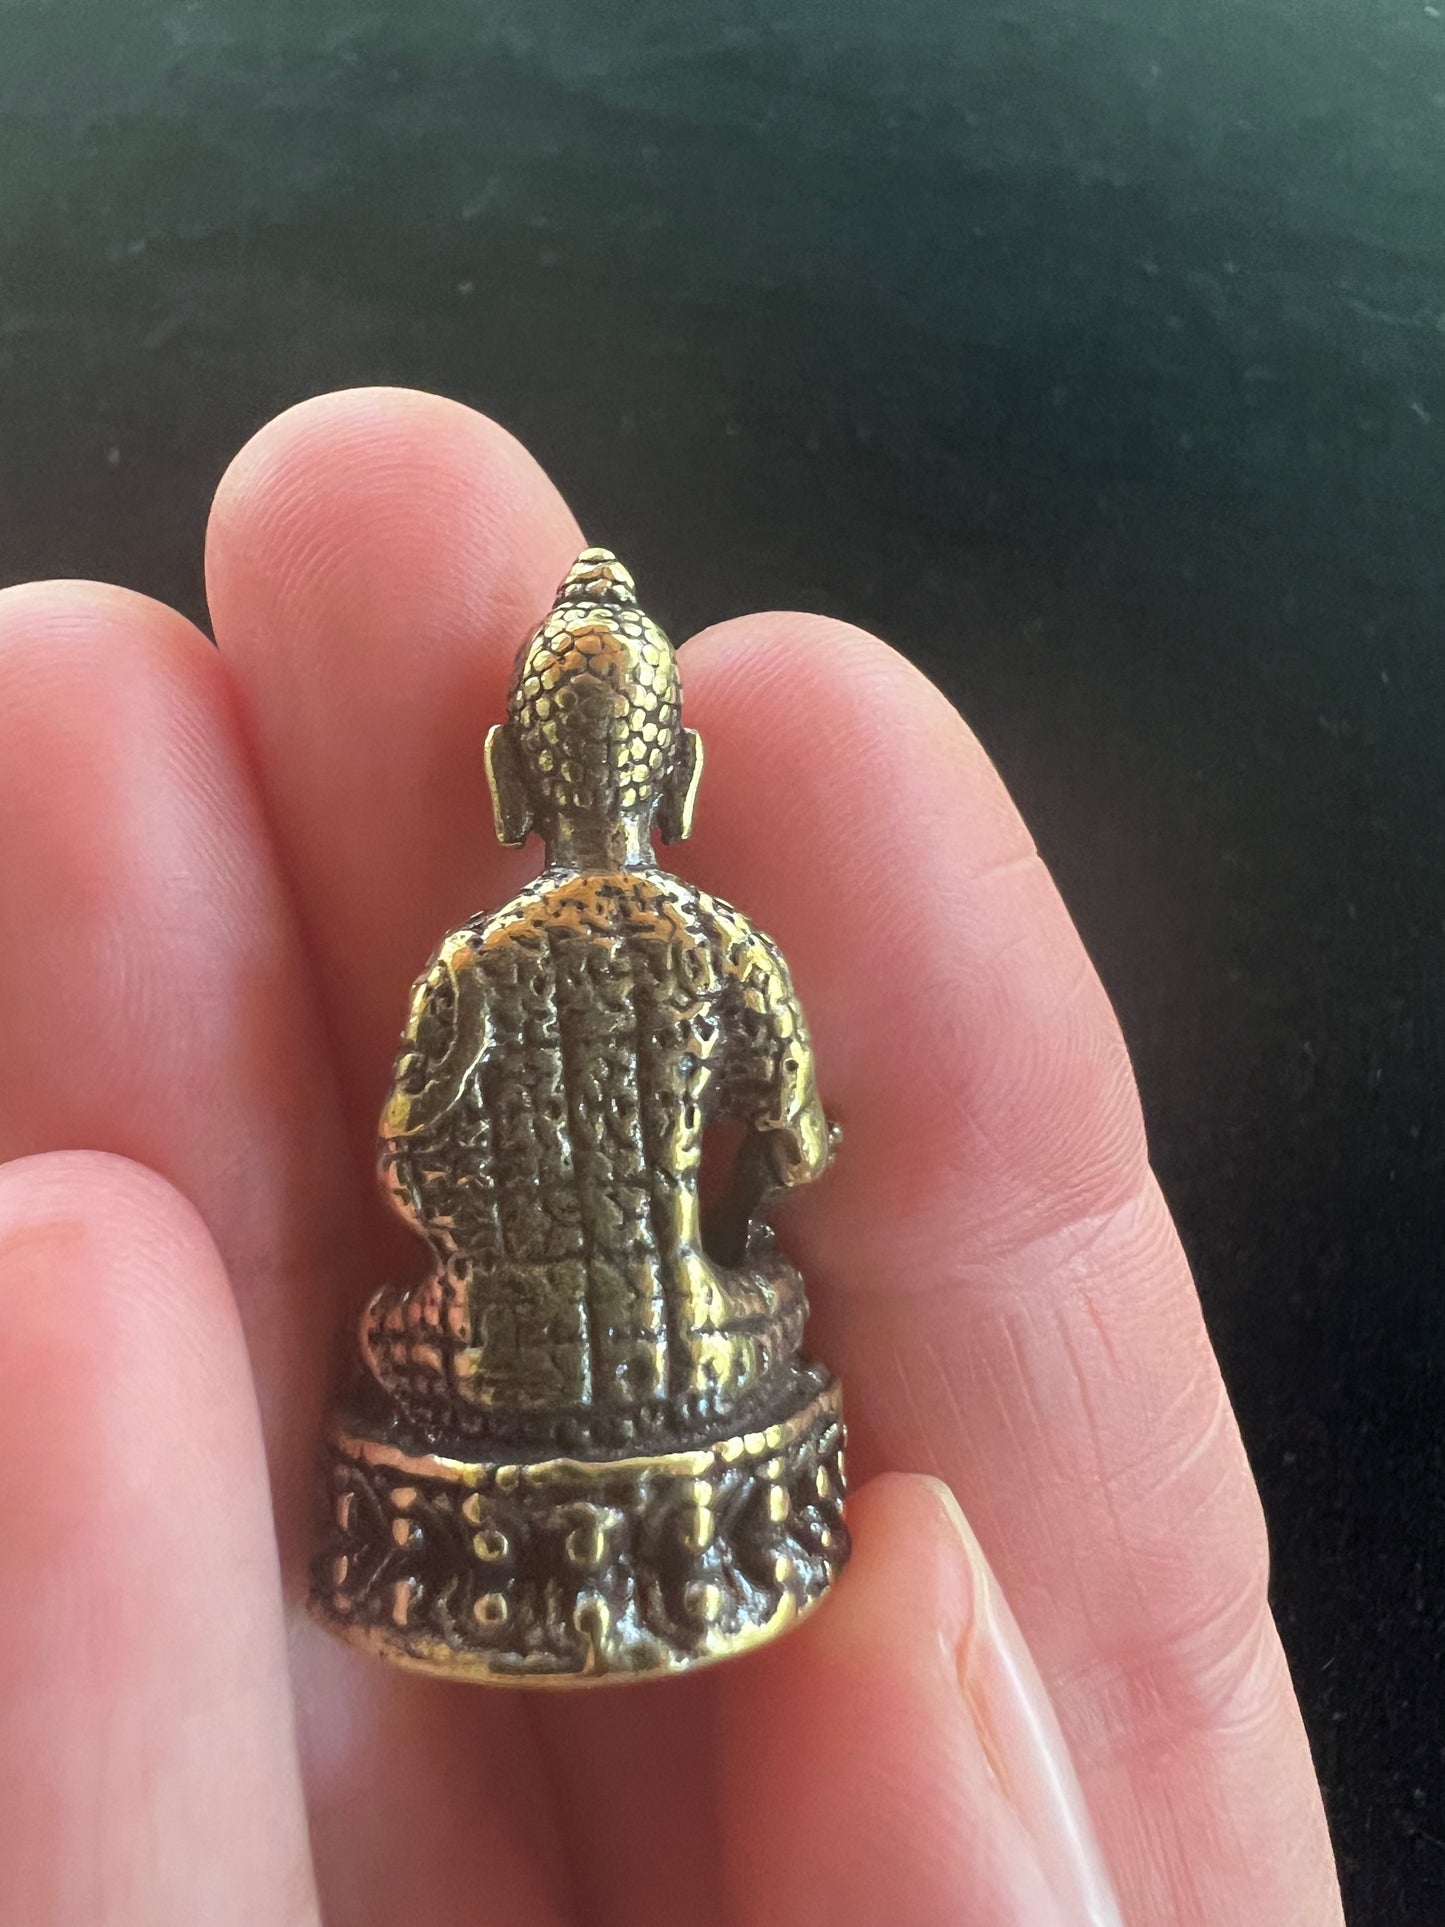 Small Medicine Buddha Statue | Handmade | 1.75 inches by 1 inches